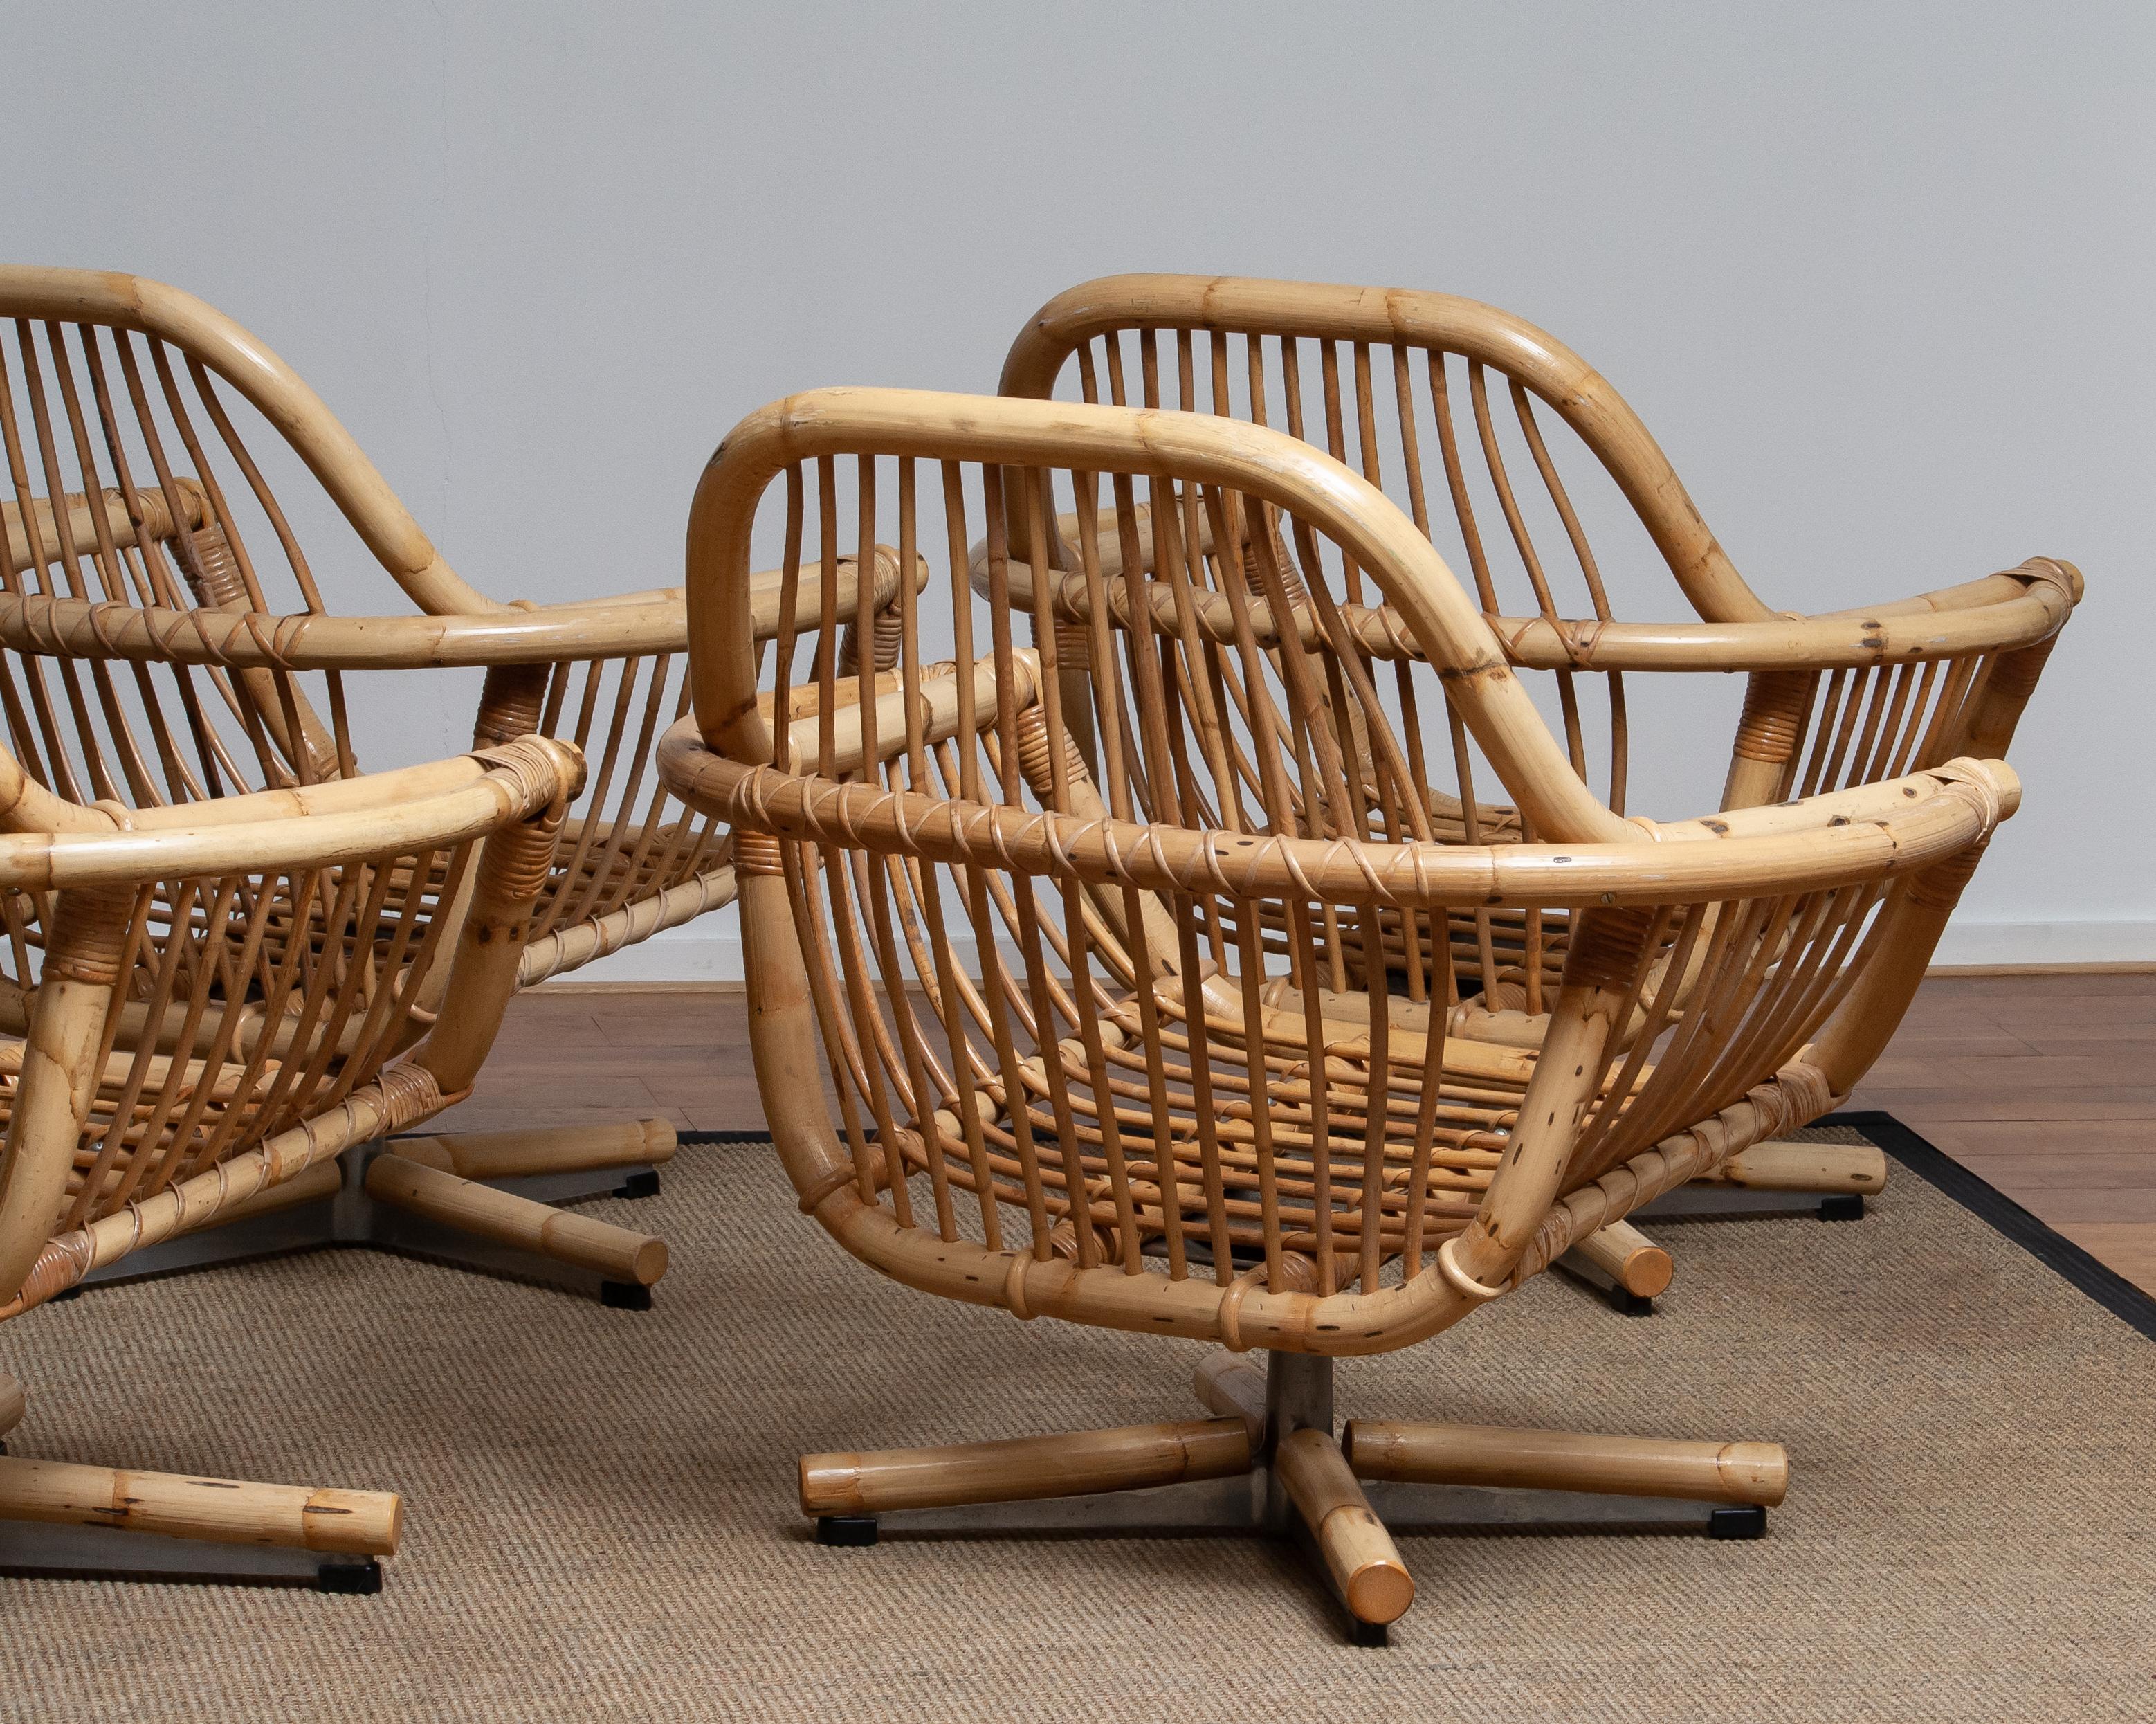 1960s Rattan Garden Set / Lounge Set Consist Five Swivel Chairs and Coffee Table 10